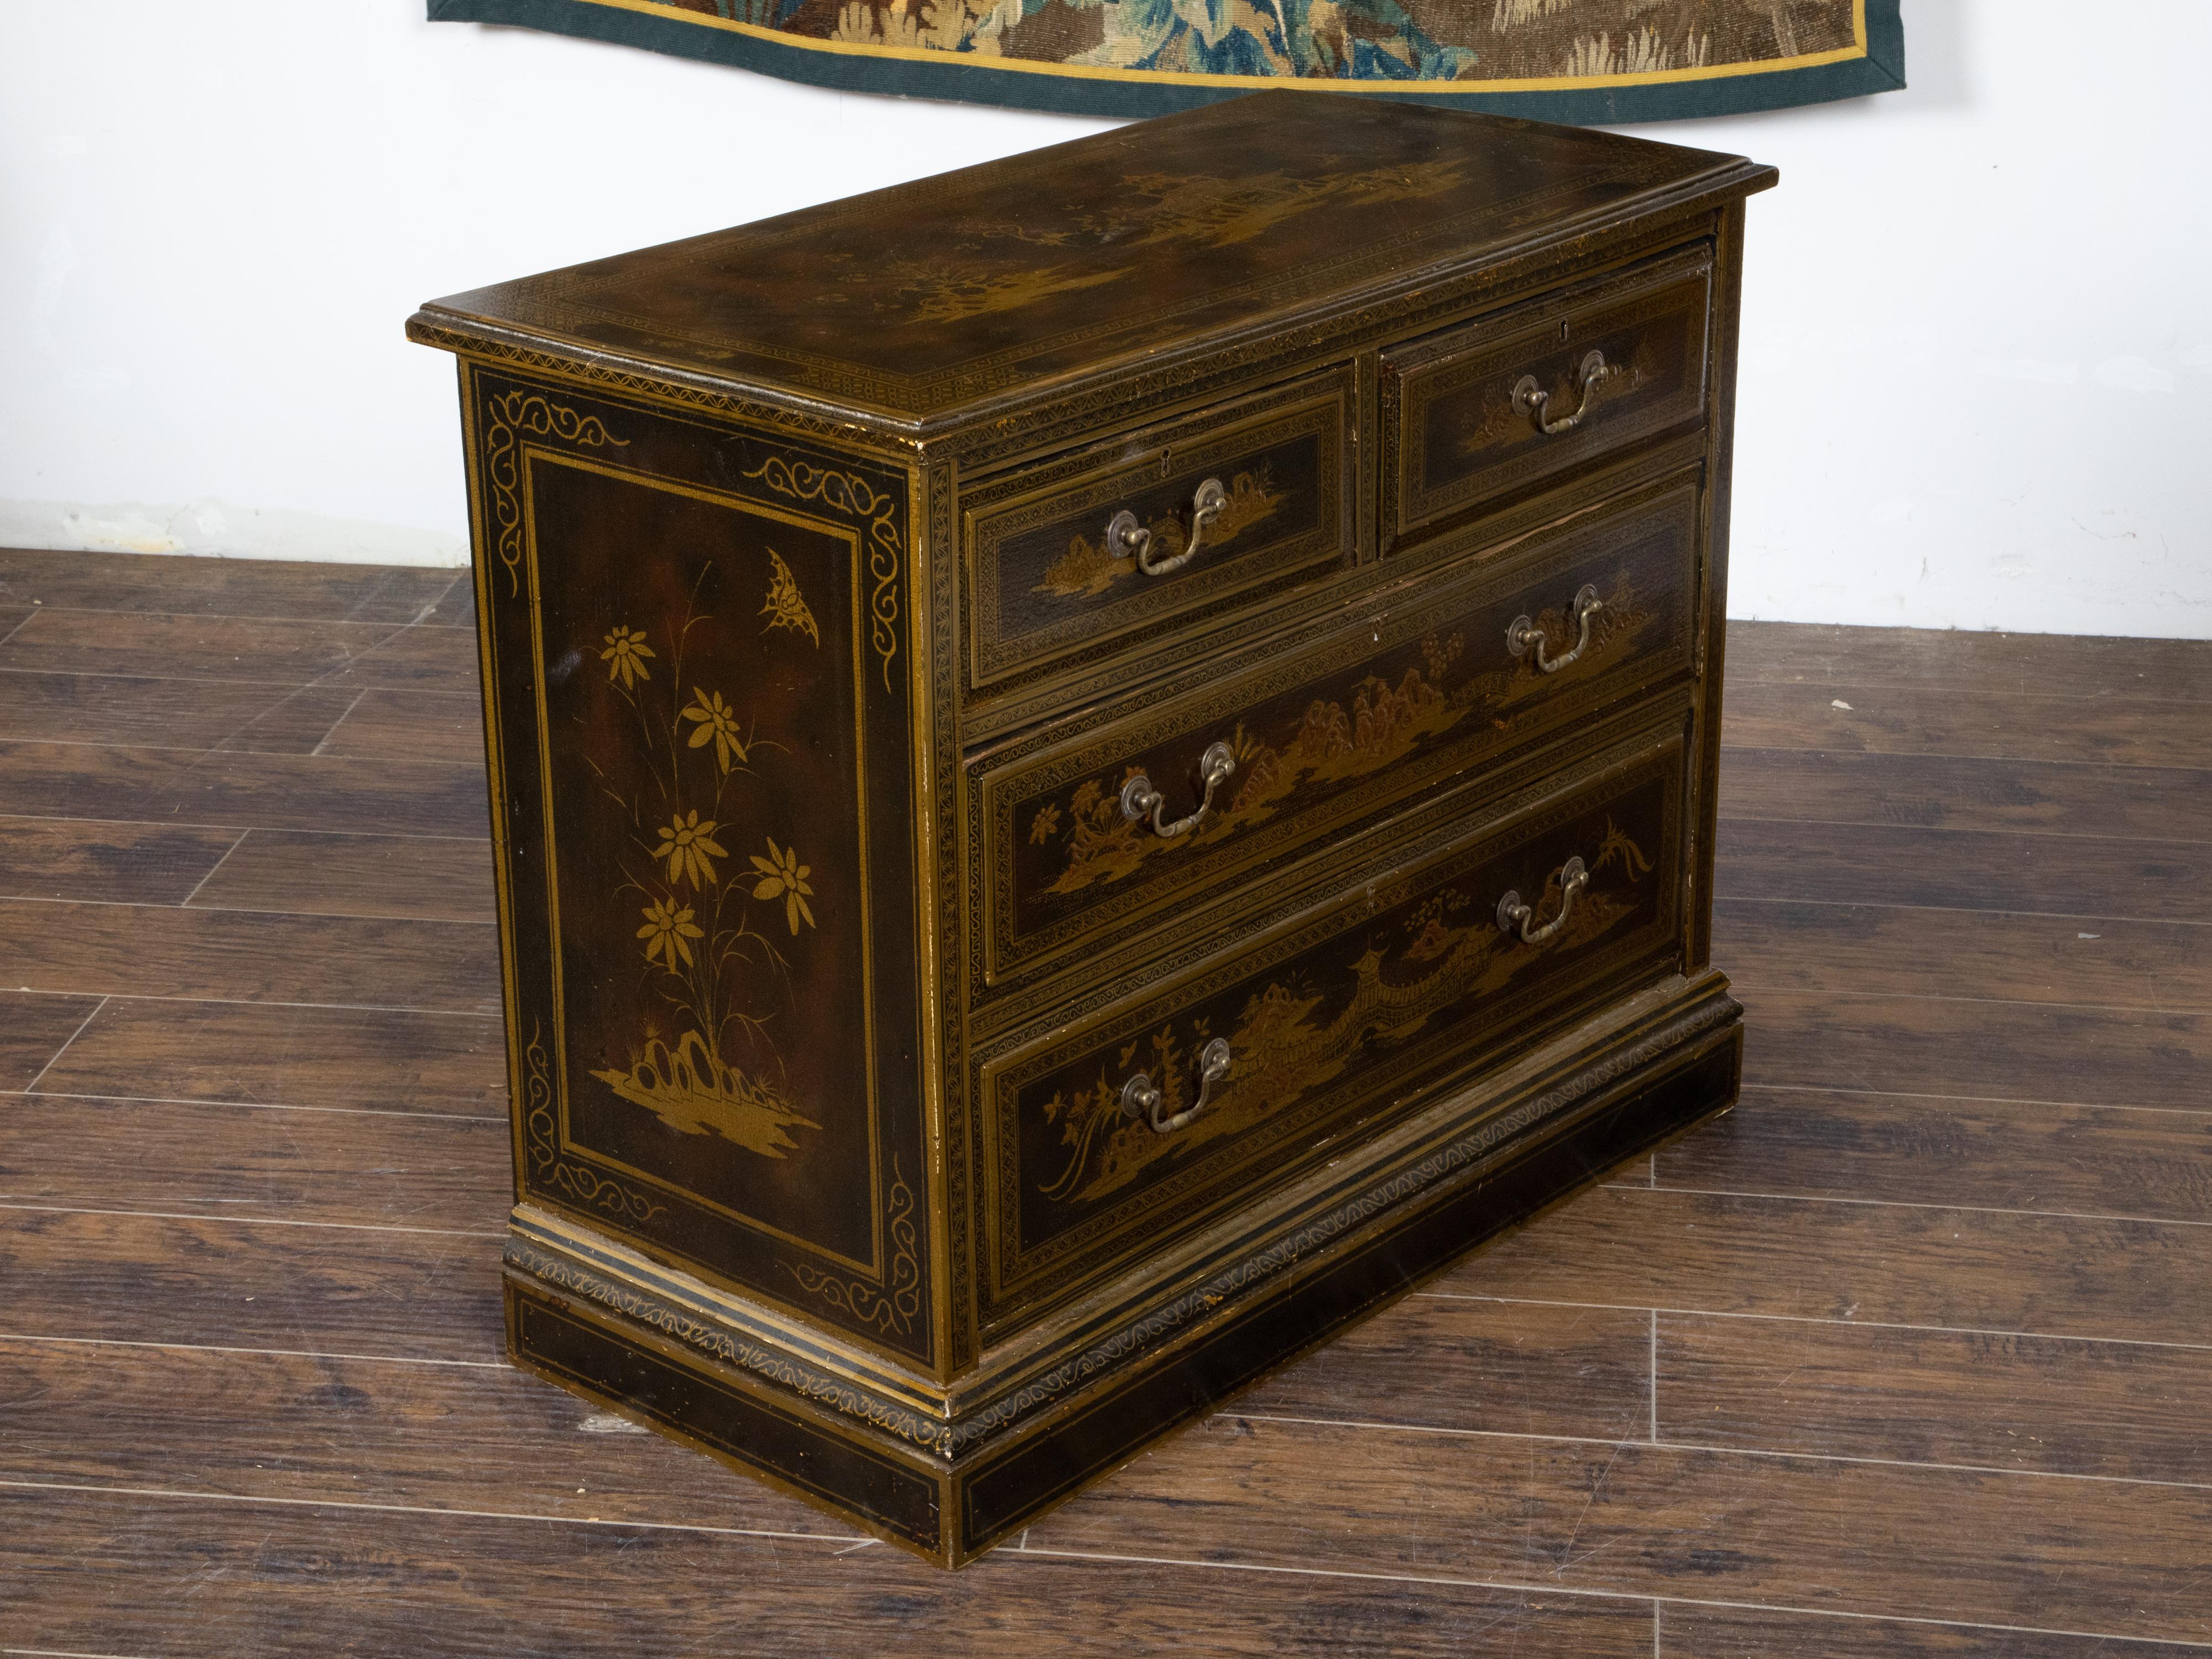 An English lacquered commode from the late 19th century, with golden Chinoiserie décor, four drawer and brass hardware. Created in England during the last quarter of the 19th century, this commode features a rectangular top adorned with an exquisite